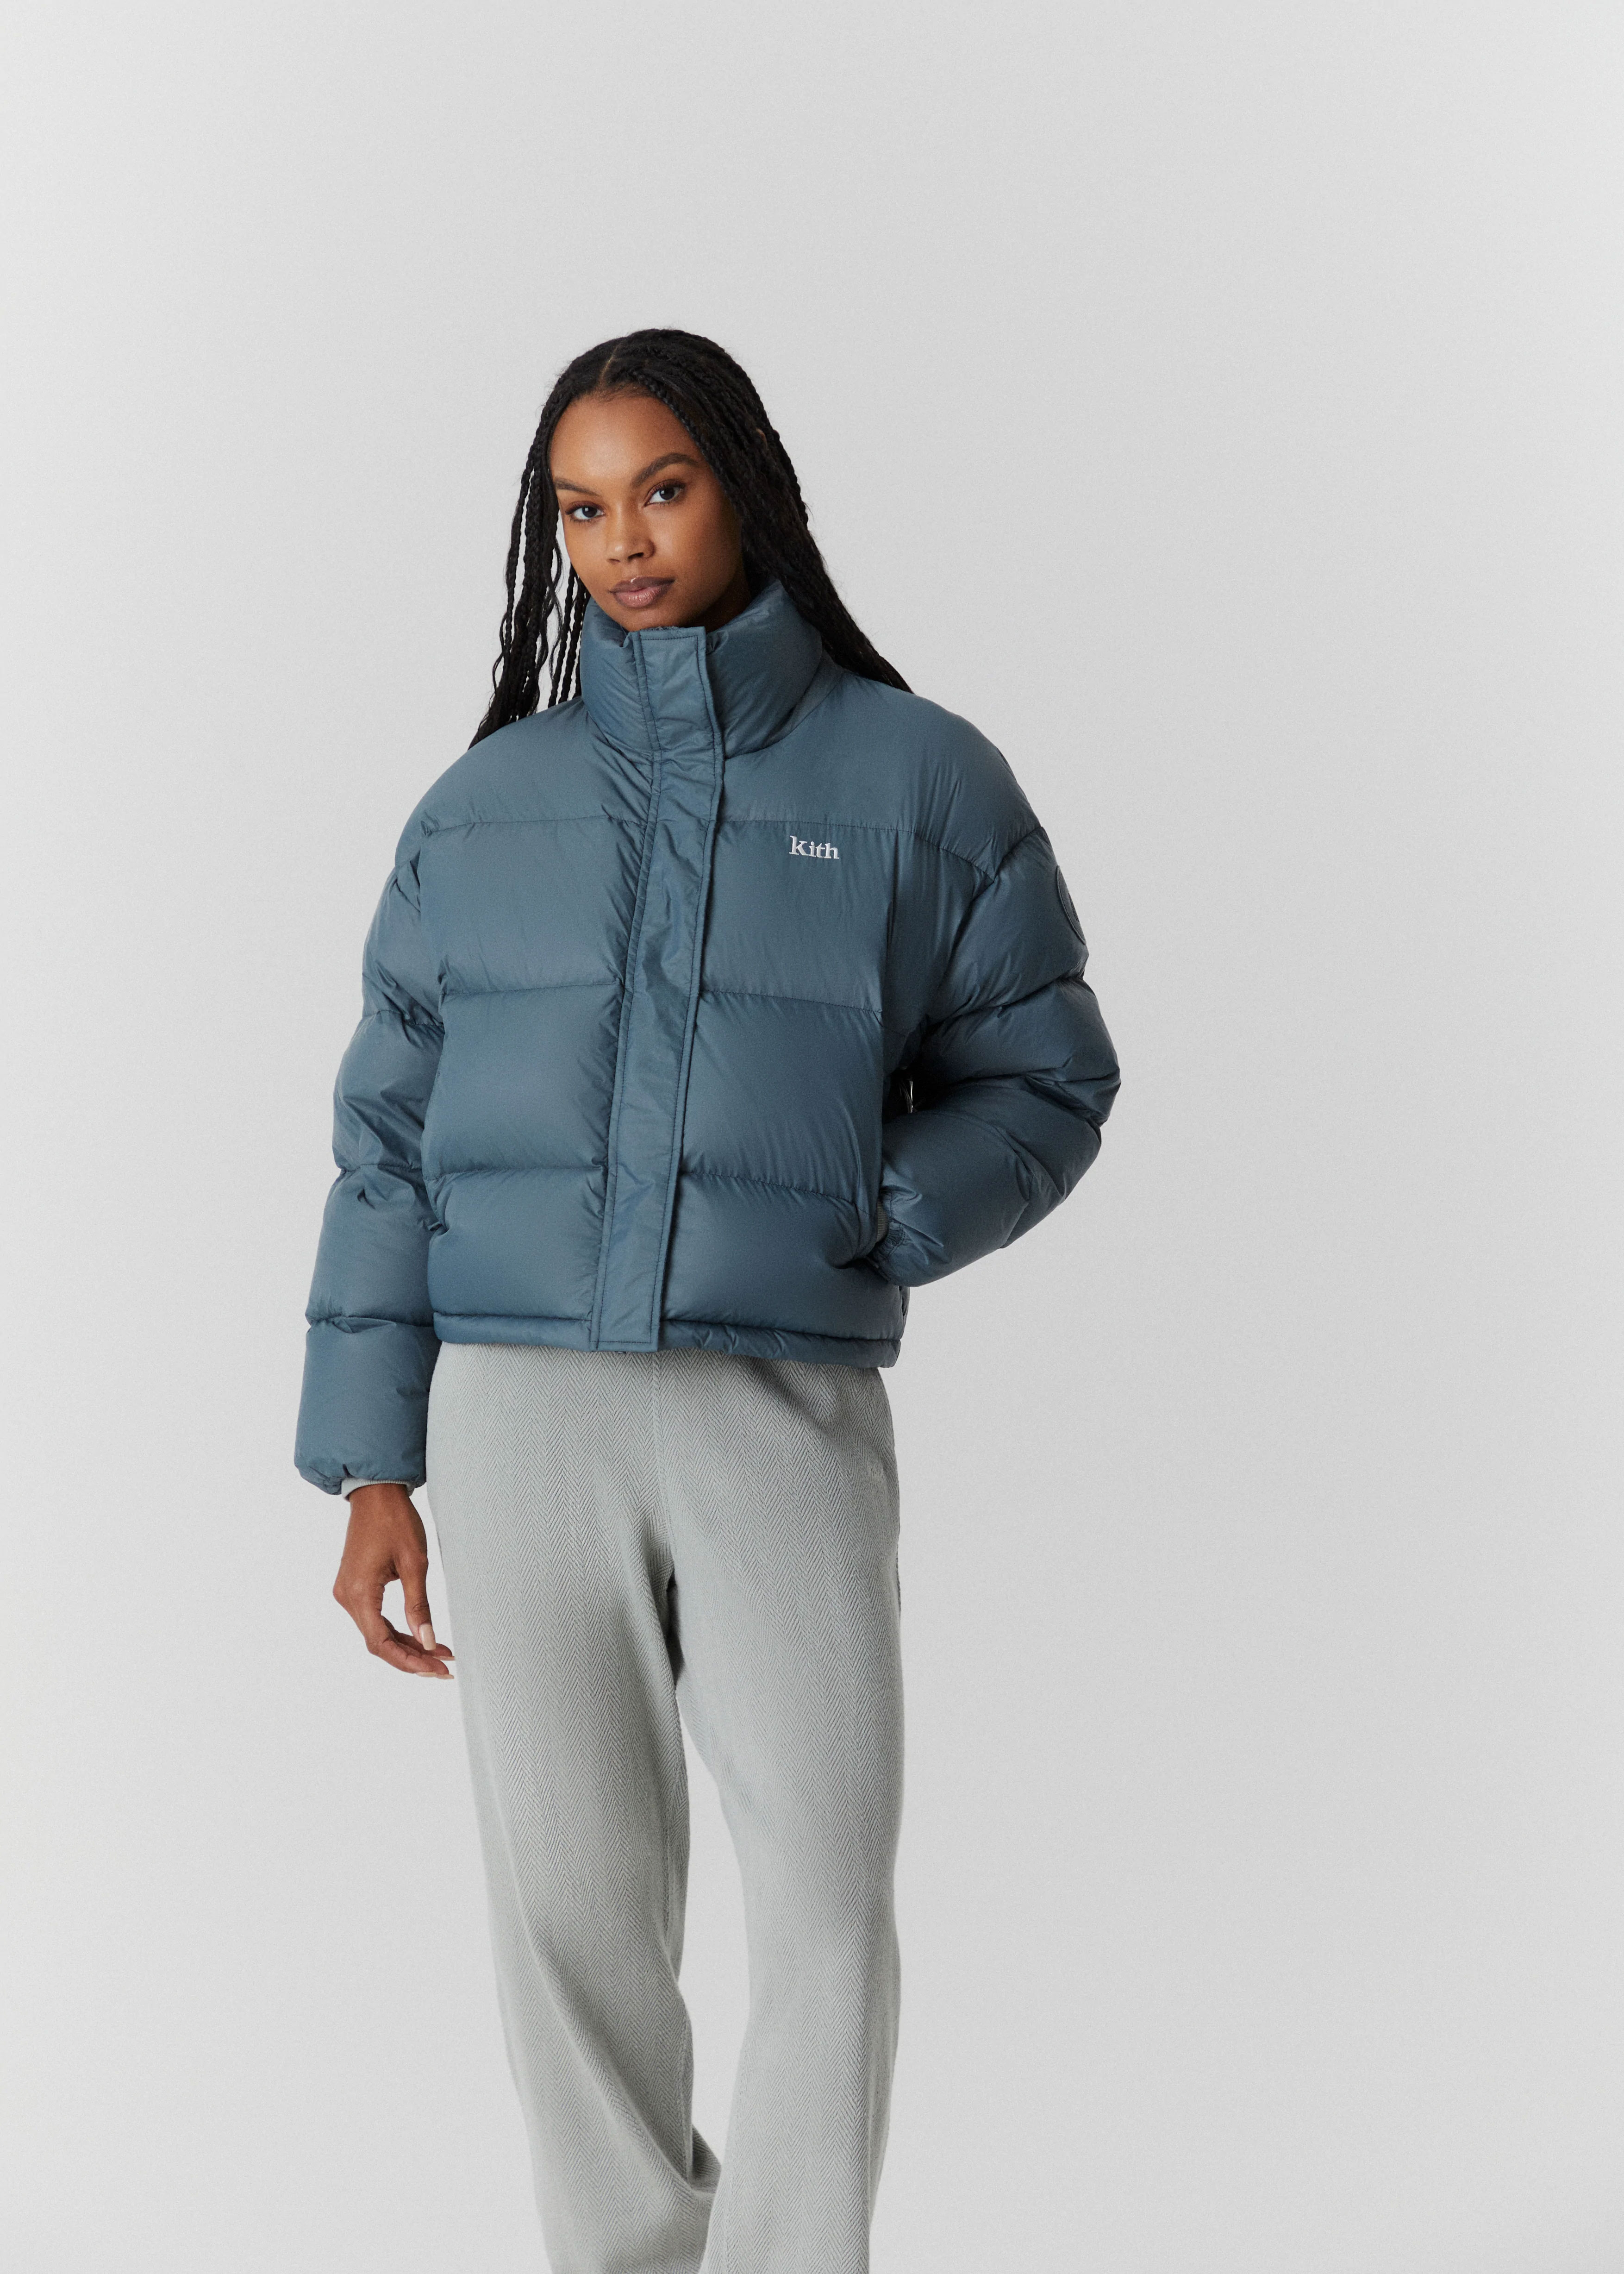 A Look at Kith Women Winter 2022 | SPLY